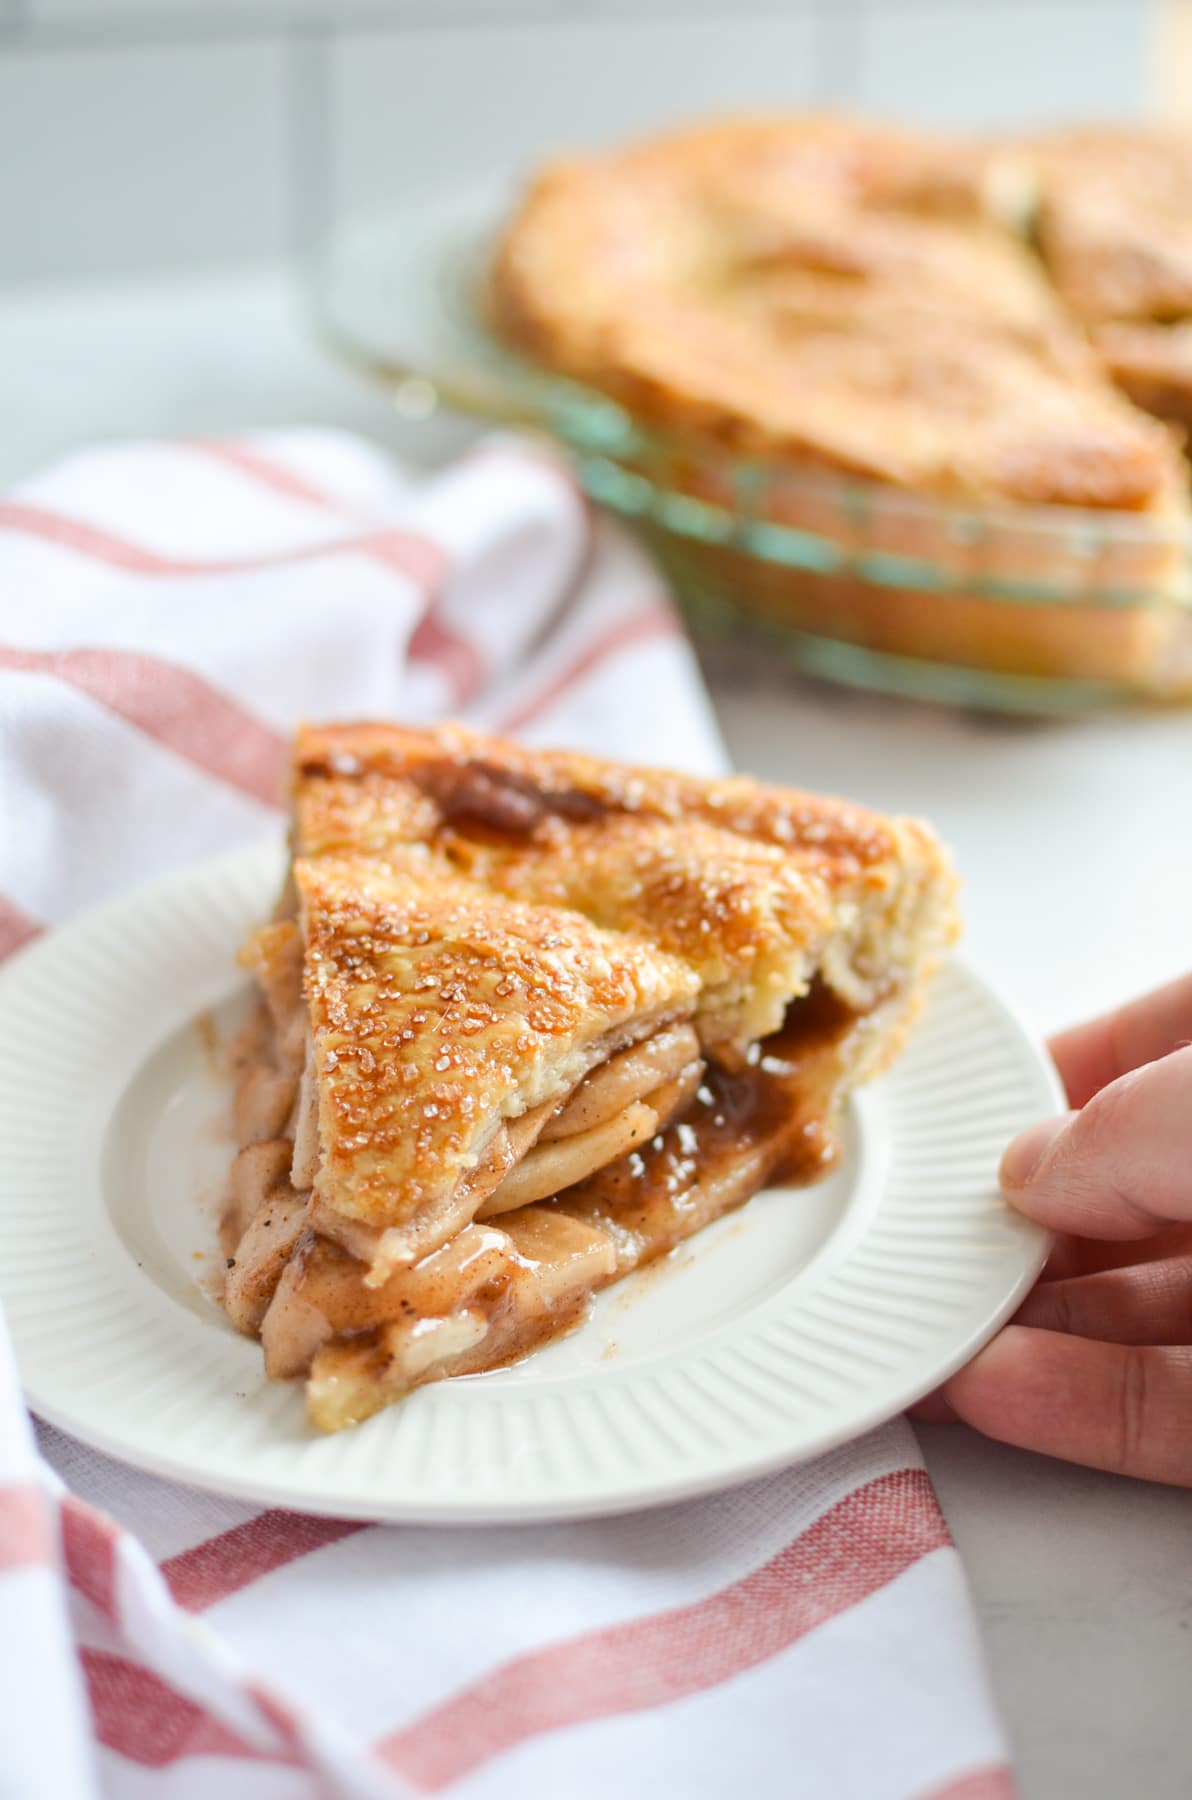 A hand holding a small plate of sourdough apple pie, resting on a white and red napkin.